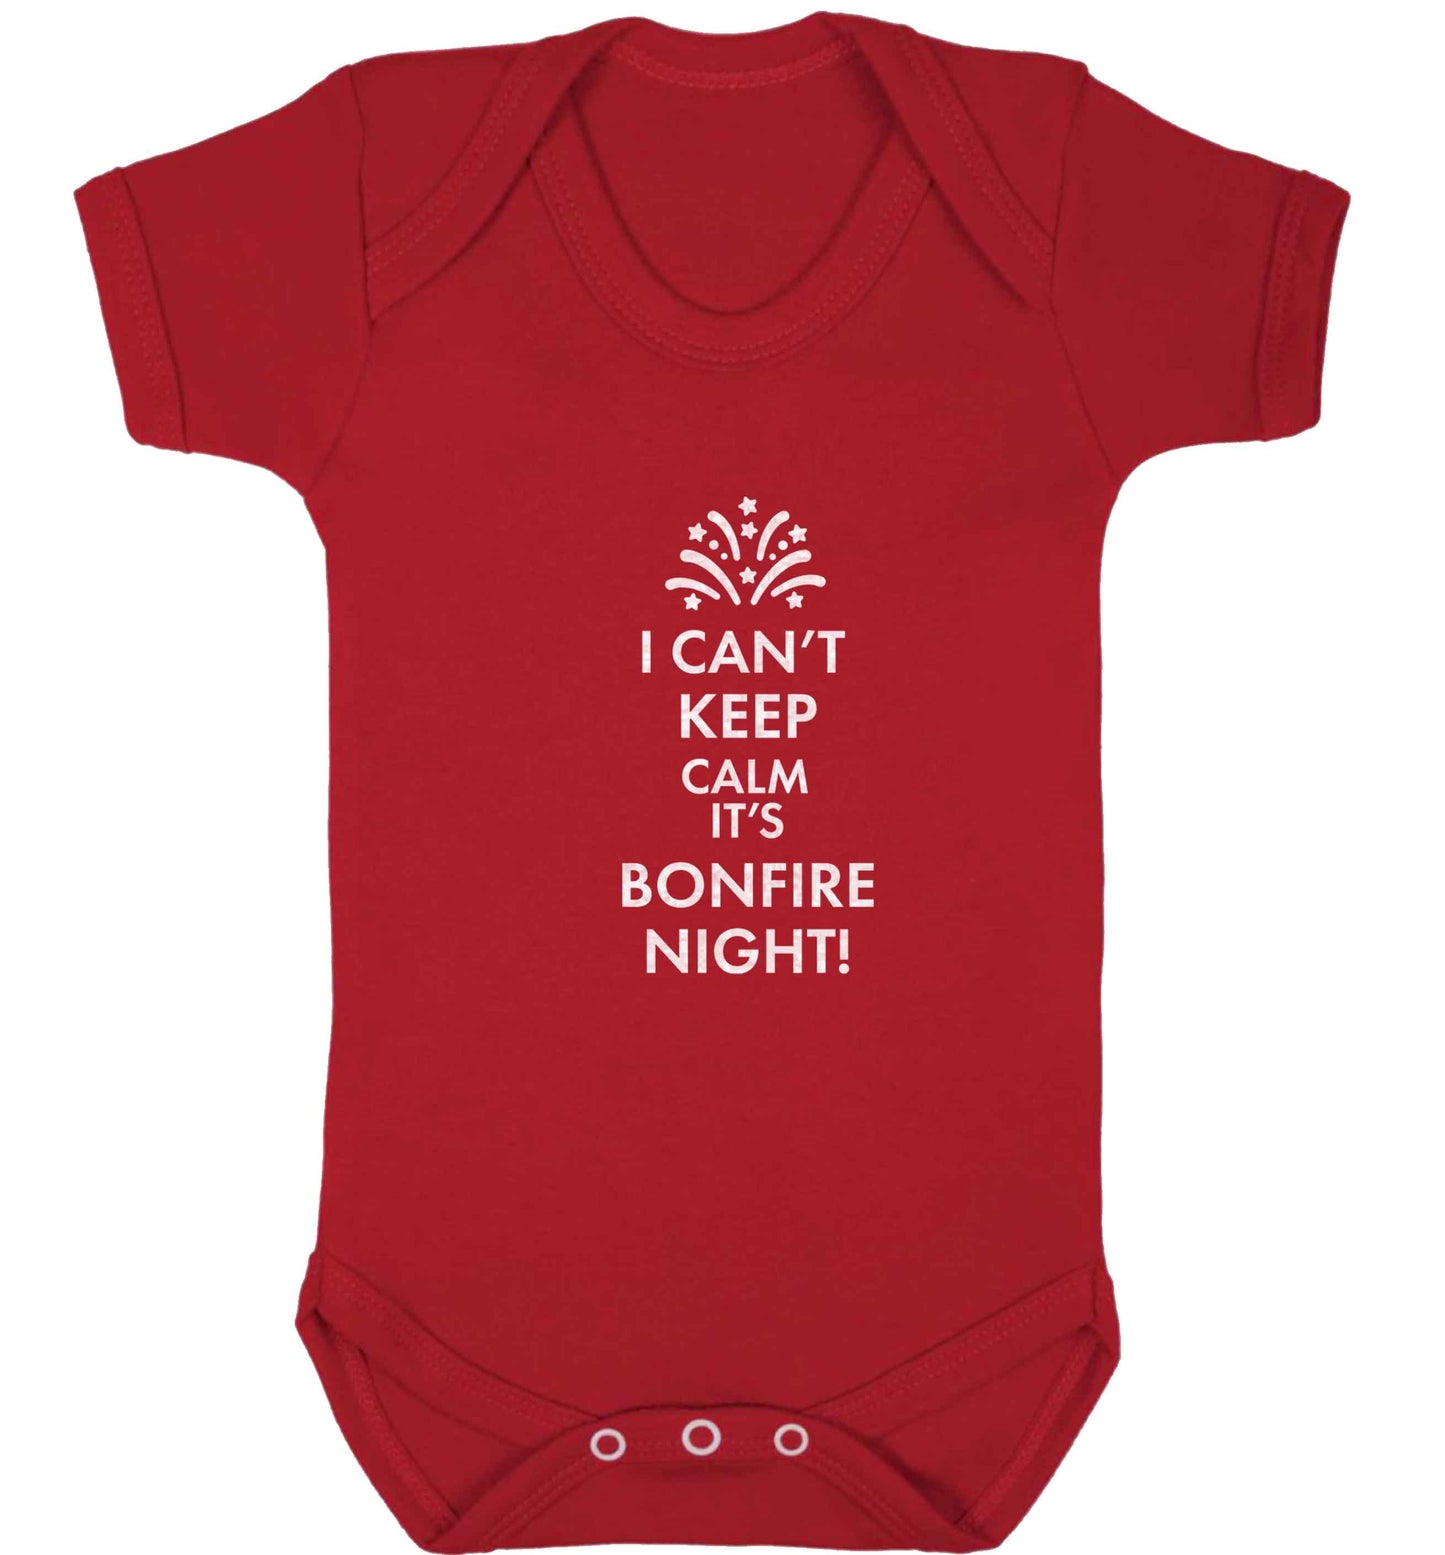 I can't keep calm its bonfire night baby vest red 18-24 months